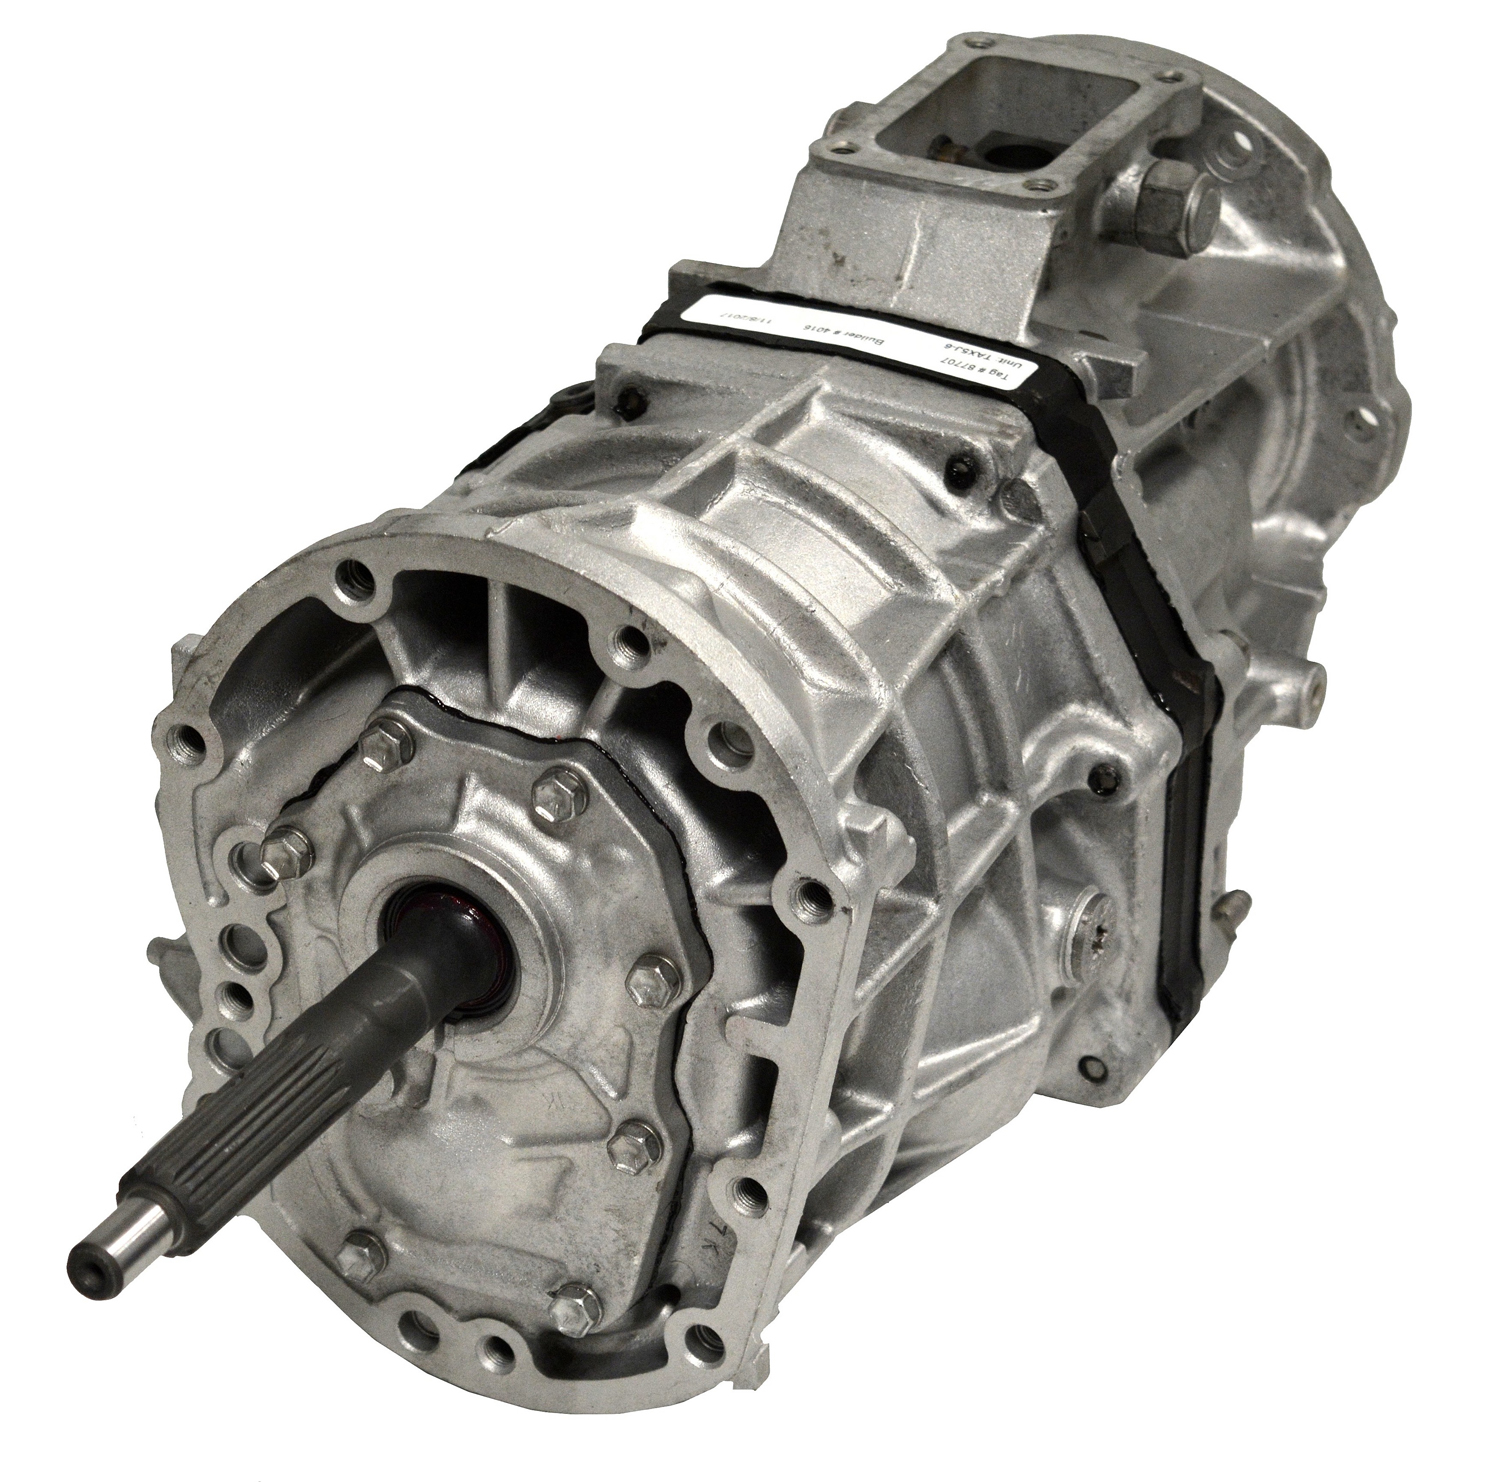 AX5 Manual Transmission for Jeep 94-95 Wrangler, 5 Speed